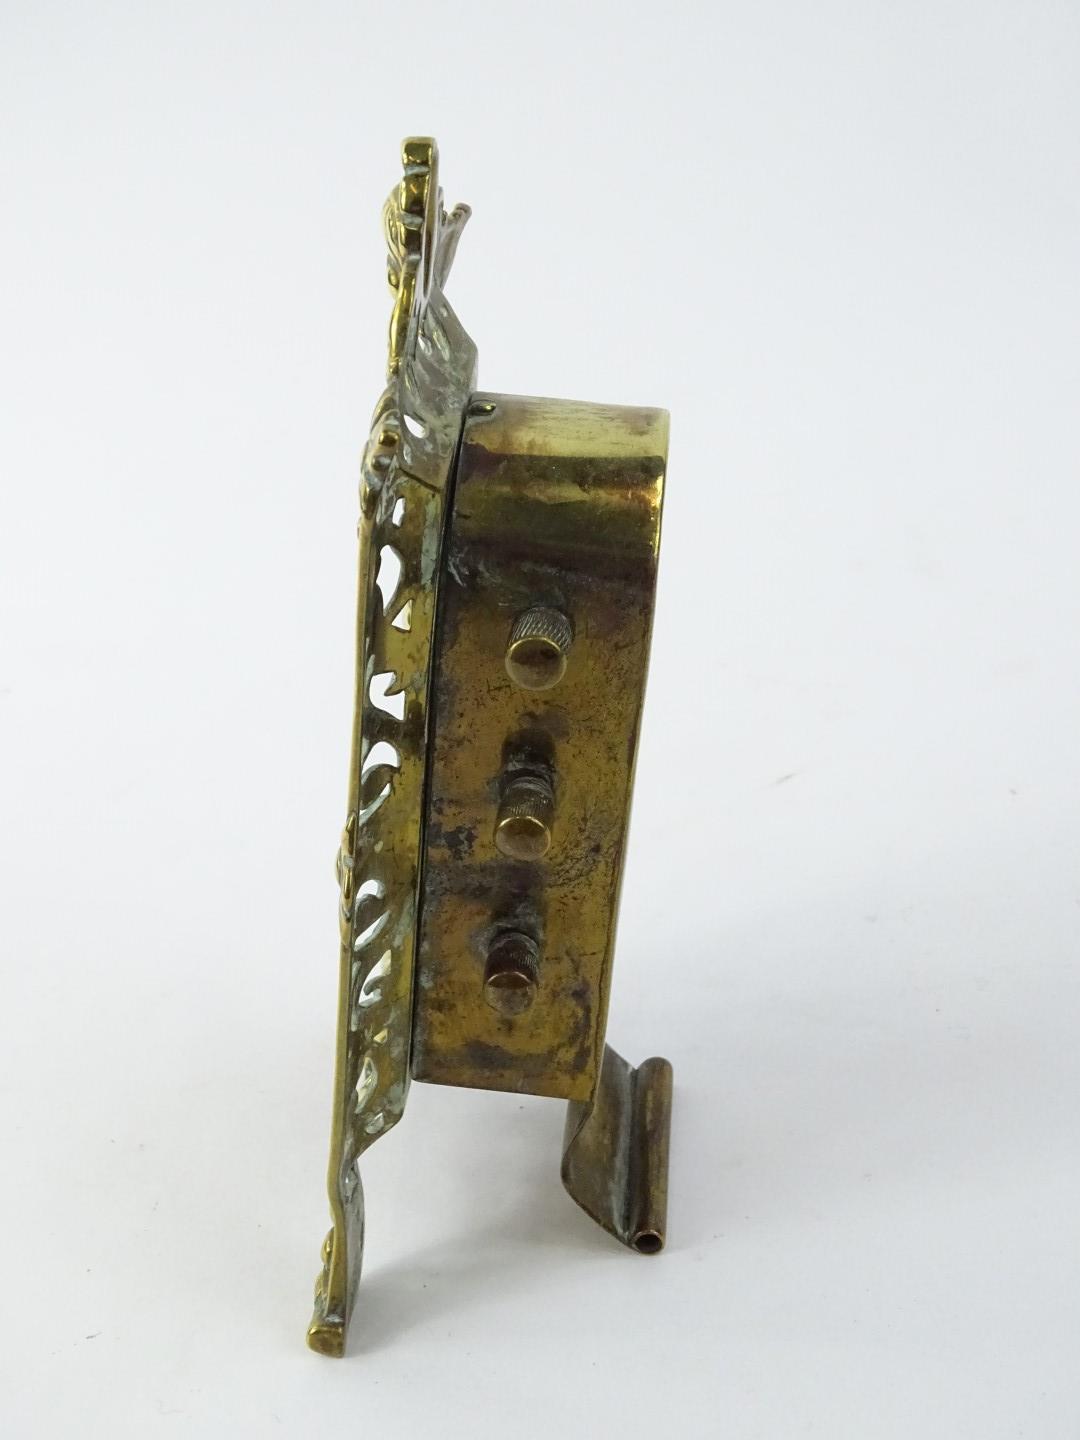 An Edwardian brass desk calendar, with pierced border and revolving drums, 20 cm H. - Image 2 of 2